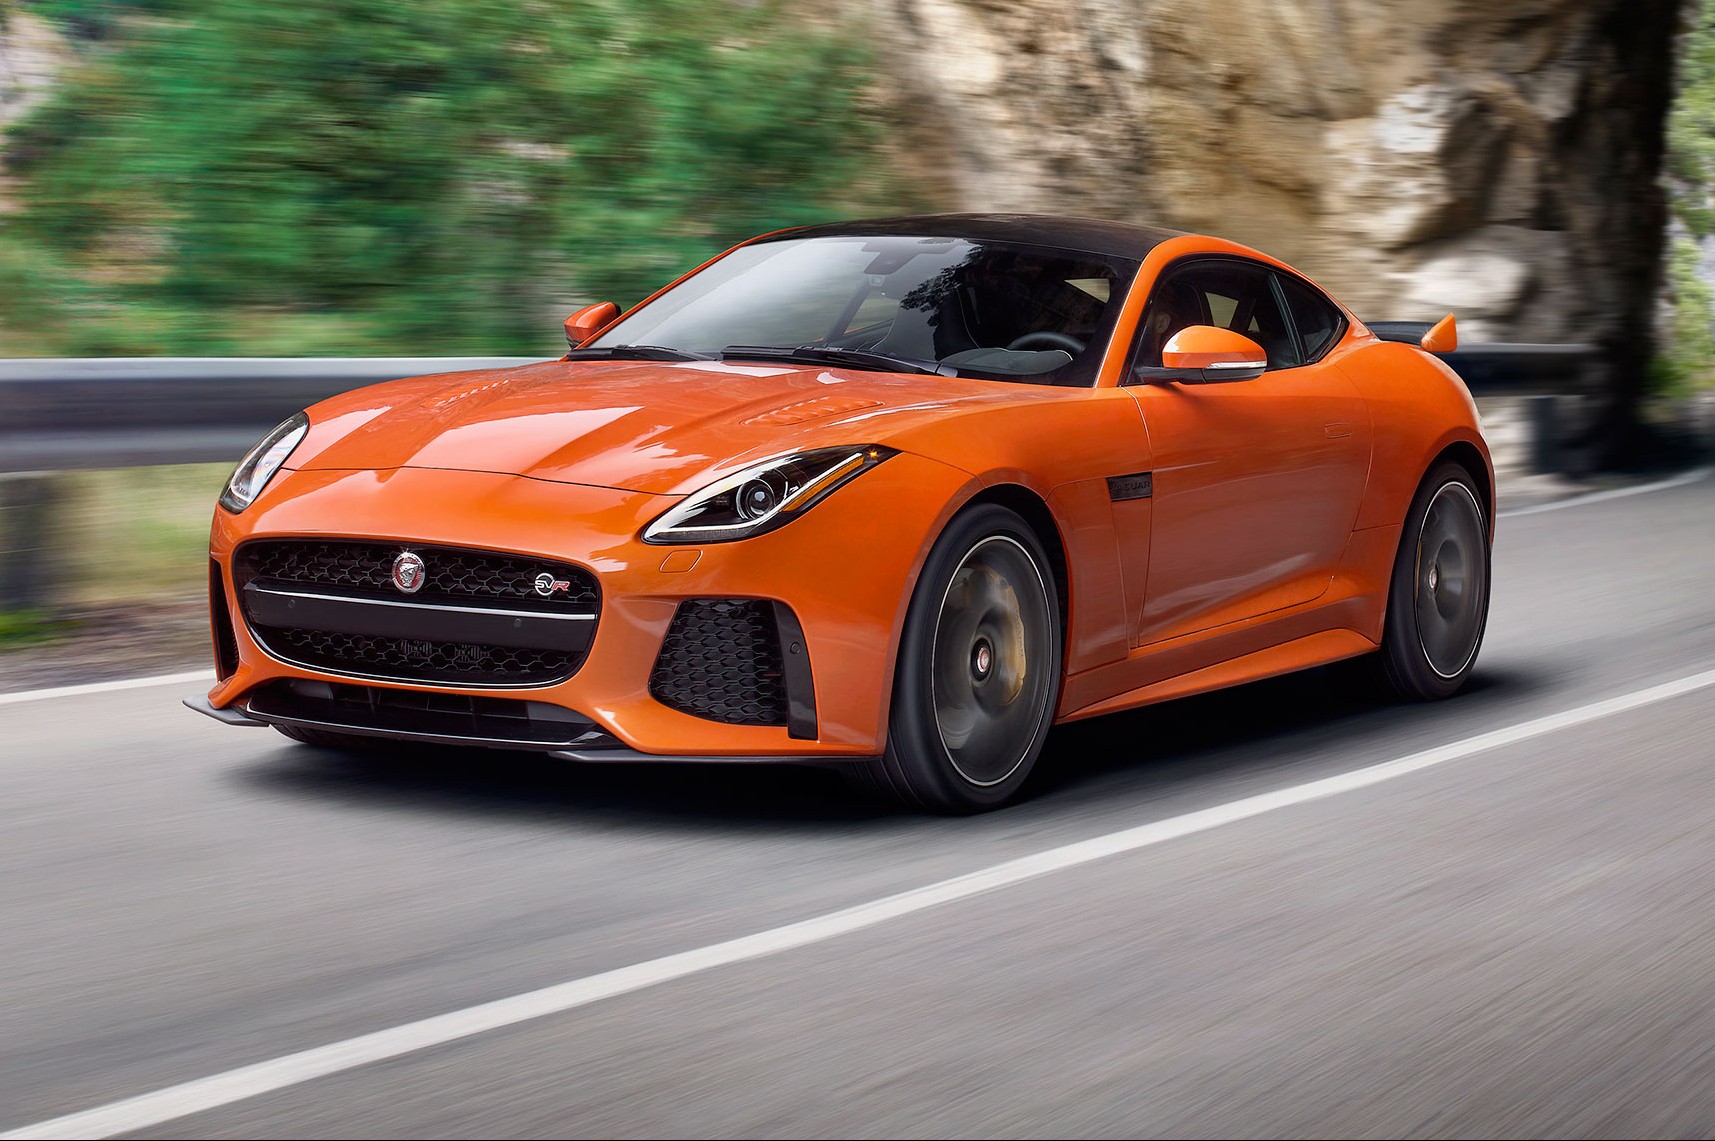 High Quality Tuning Files Jaguar F Type 5.0 V8 Supercharged 'Project 7' 575hp